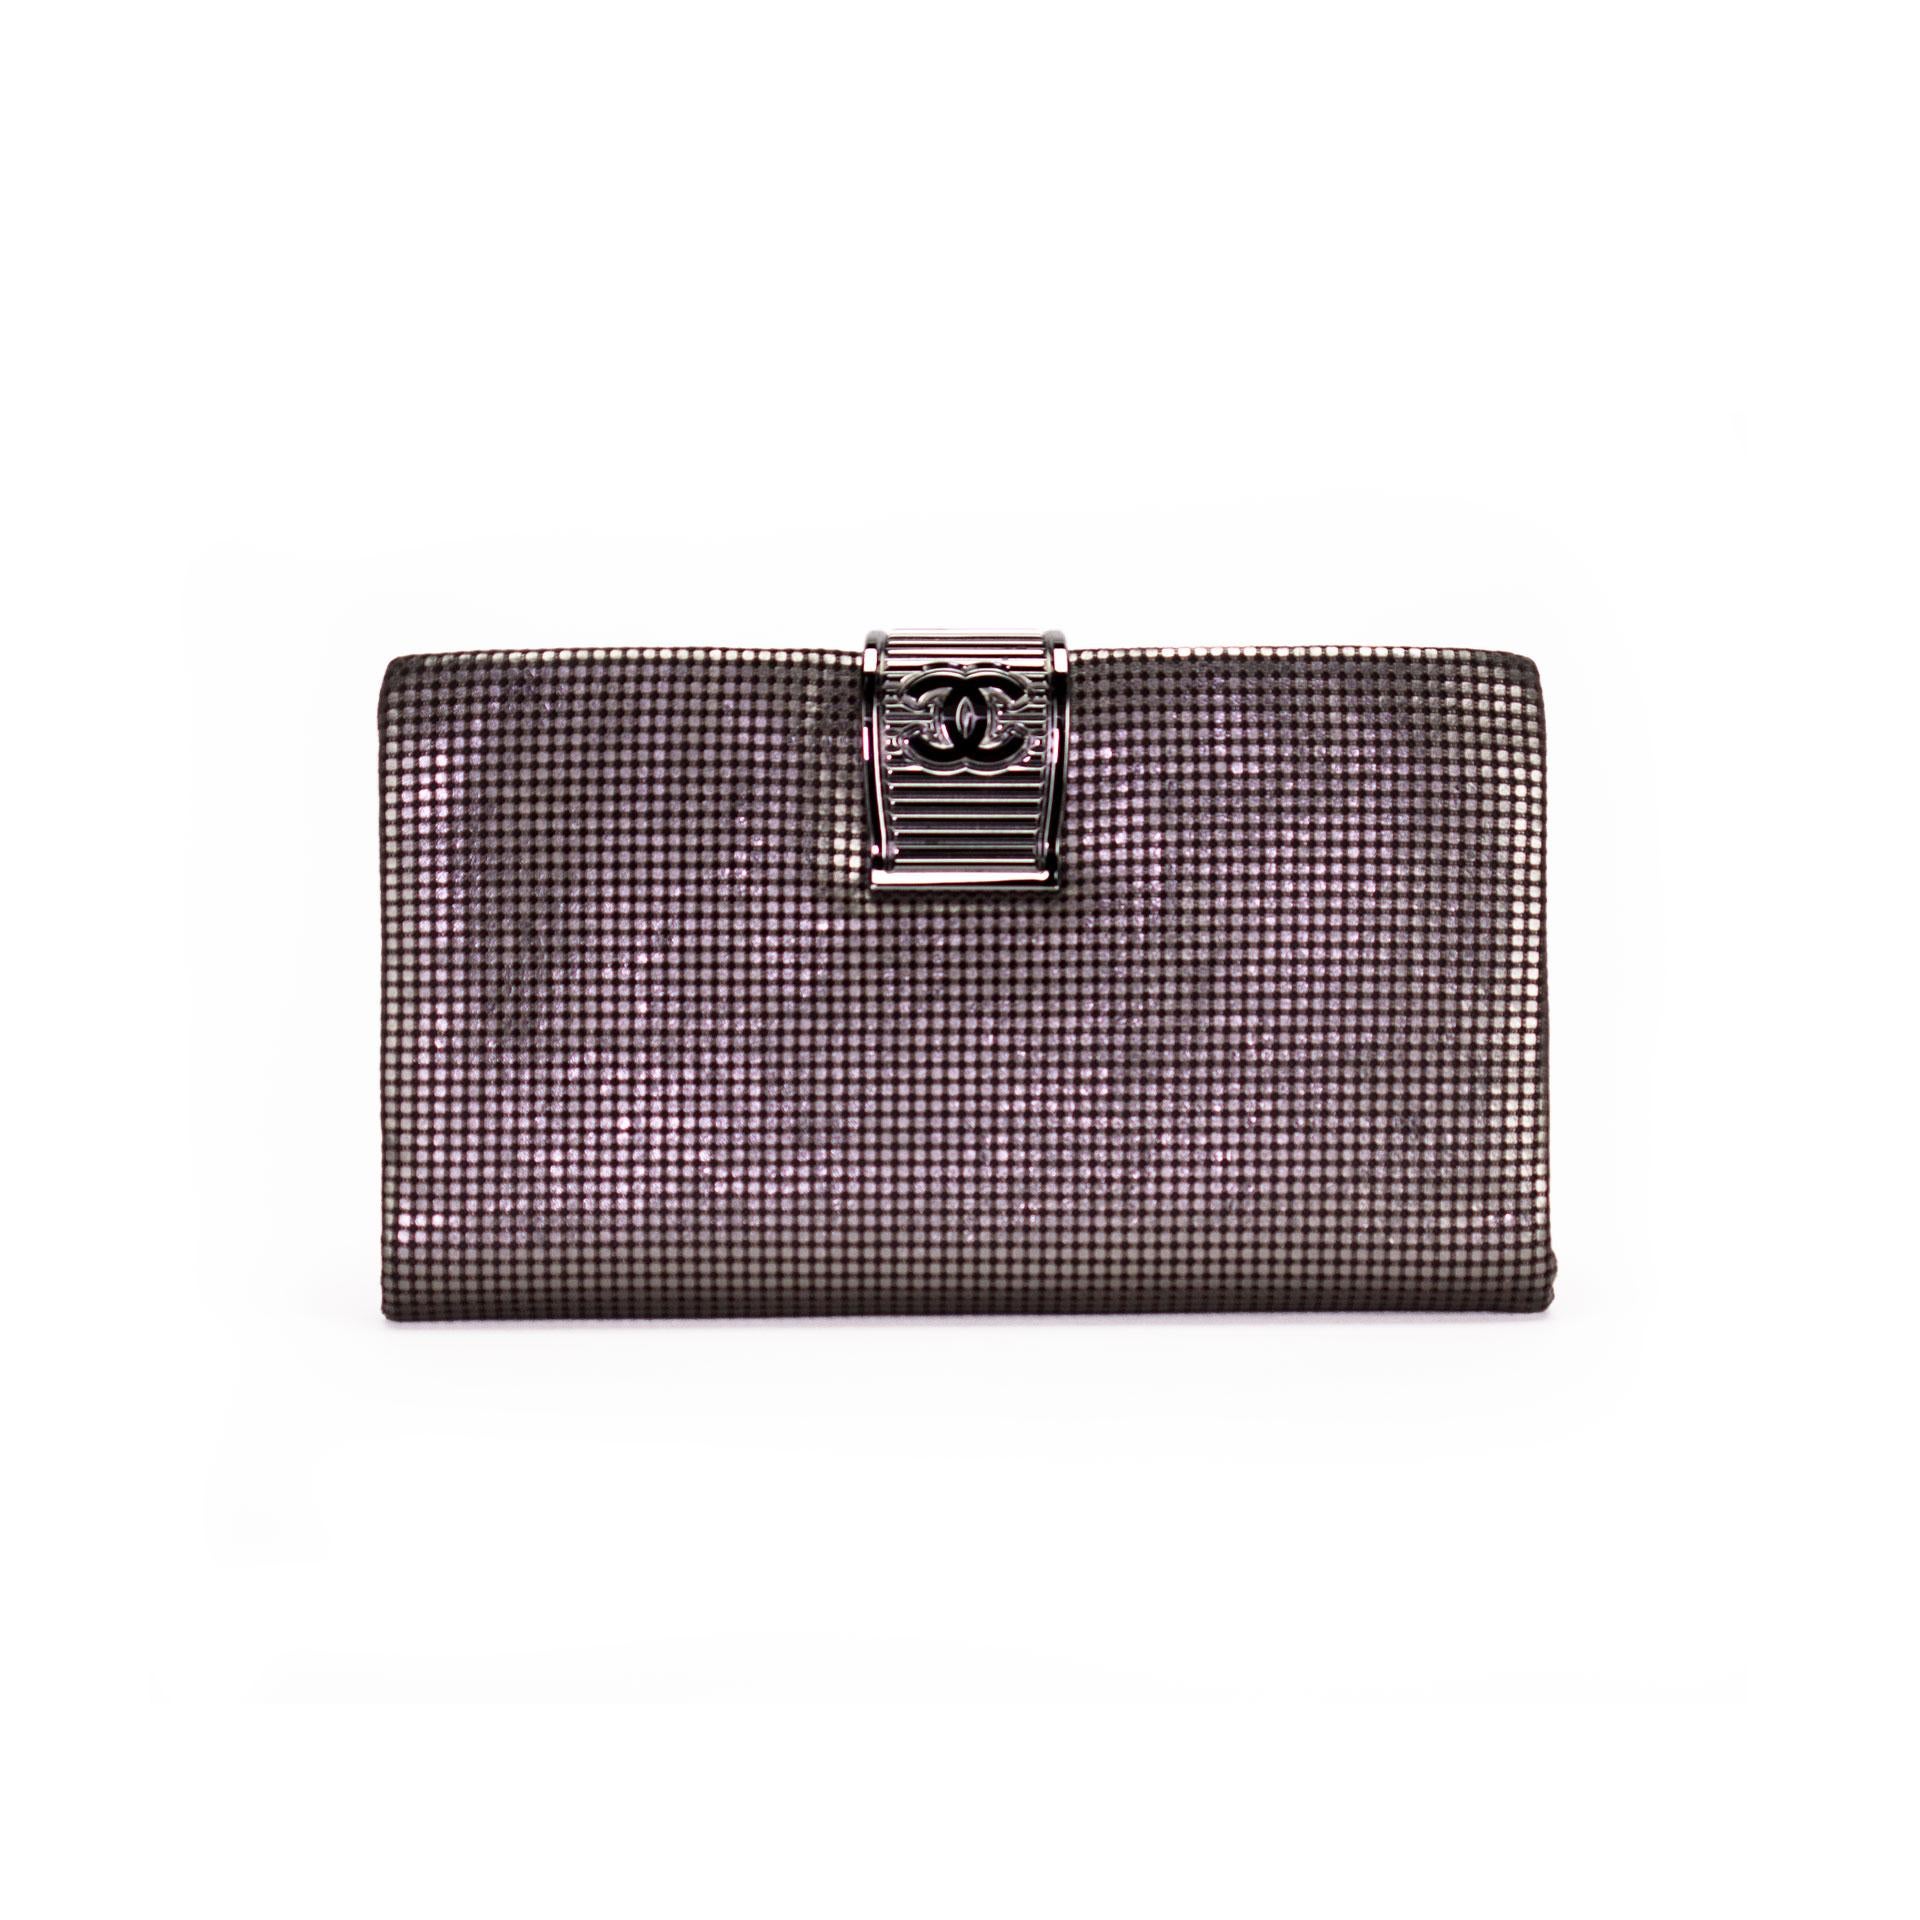 Chanel 2007 Laser Etched Chainmail Metallic Clutch Evening Gala Bag For Sale 1